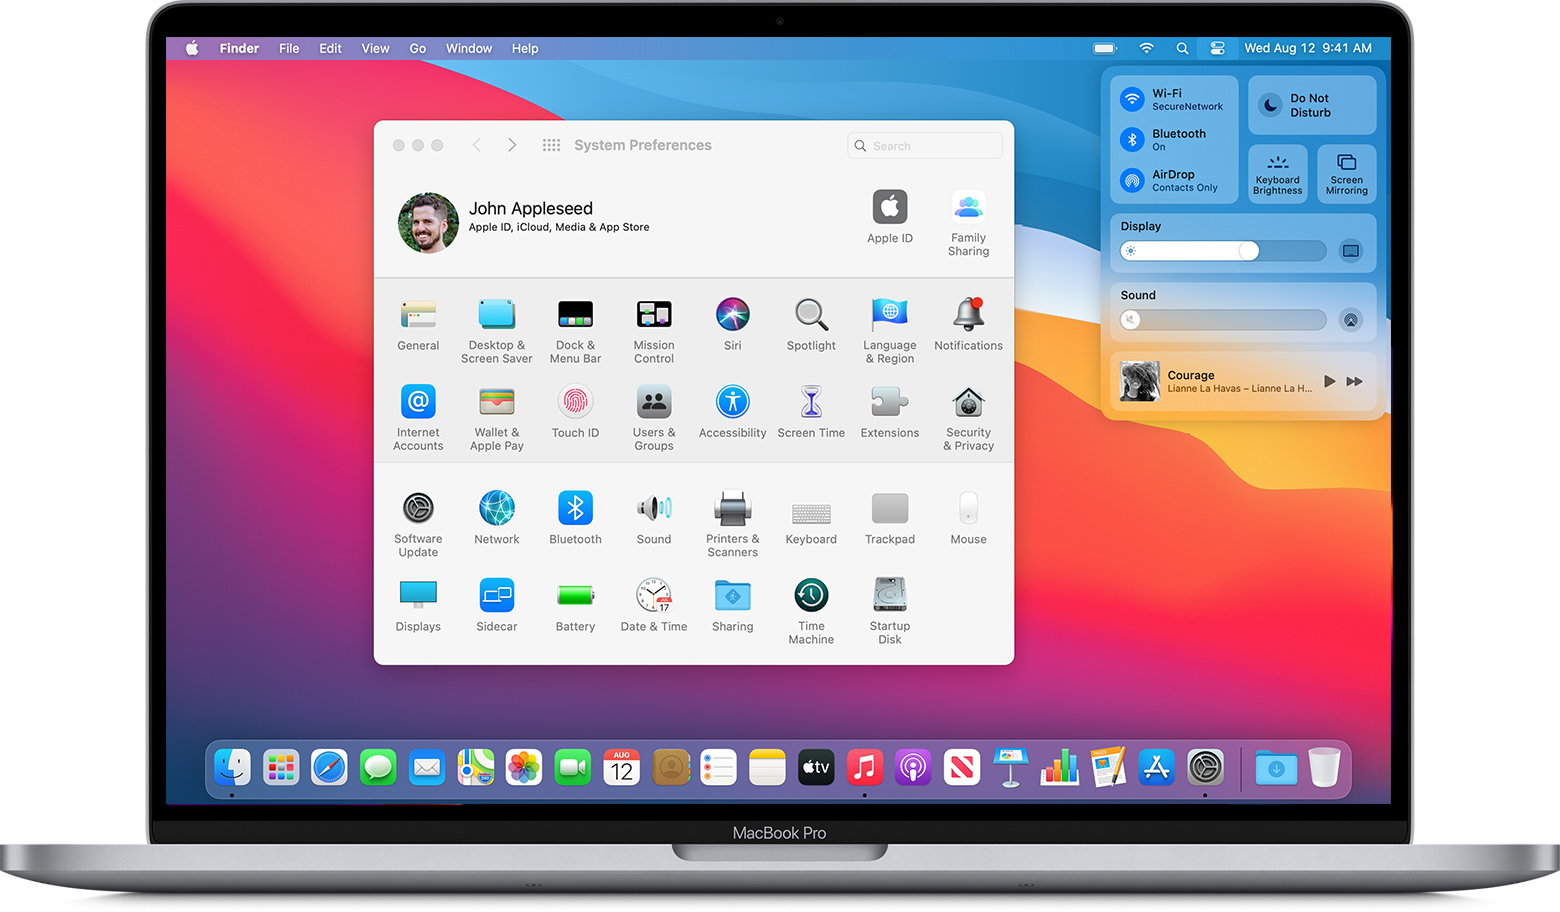 Is Apple’s method forcing pros to ditch Mac for Windows? 1